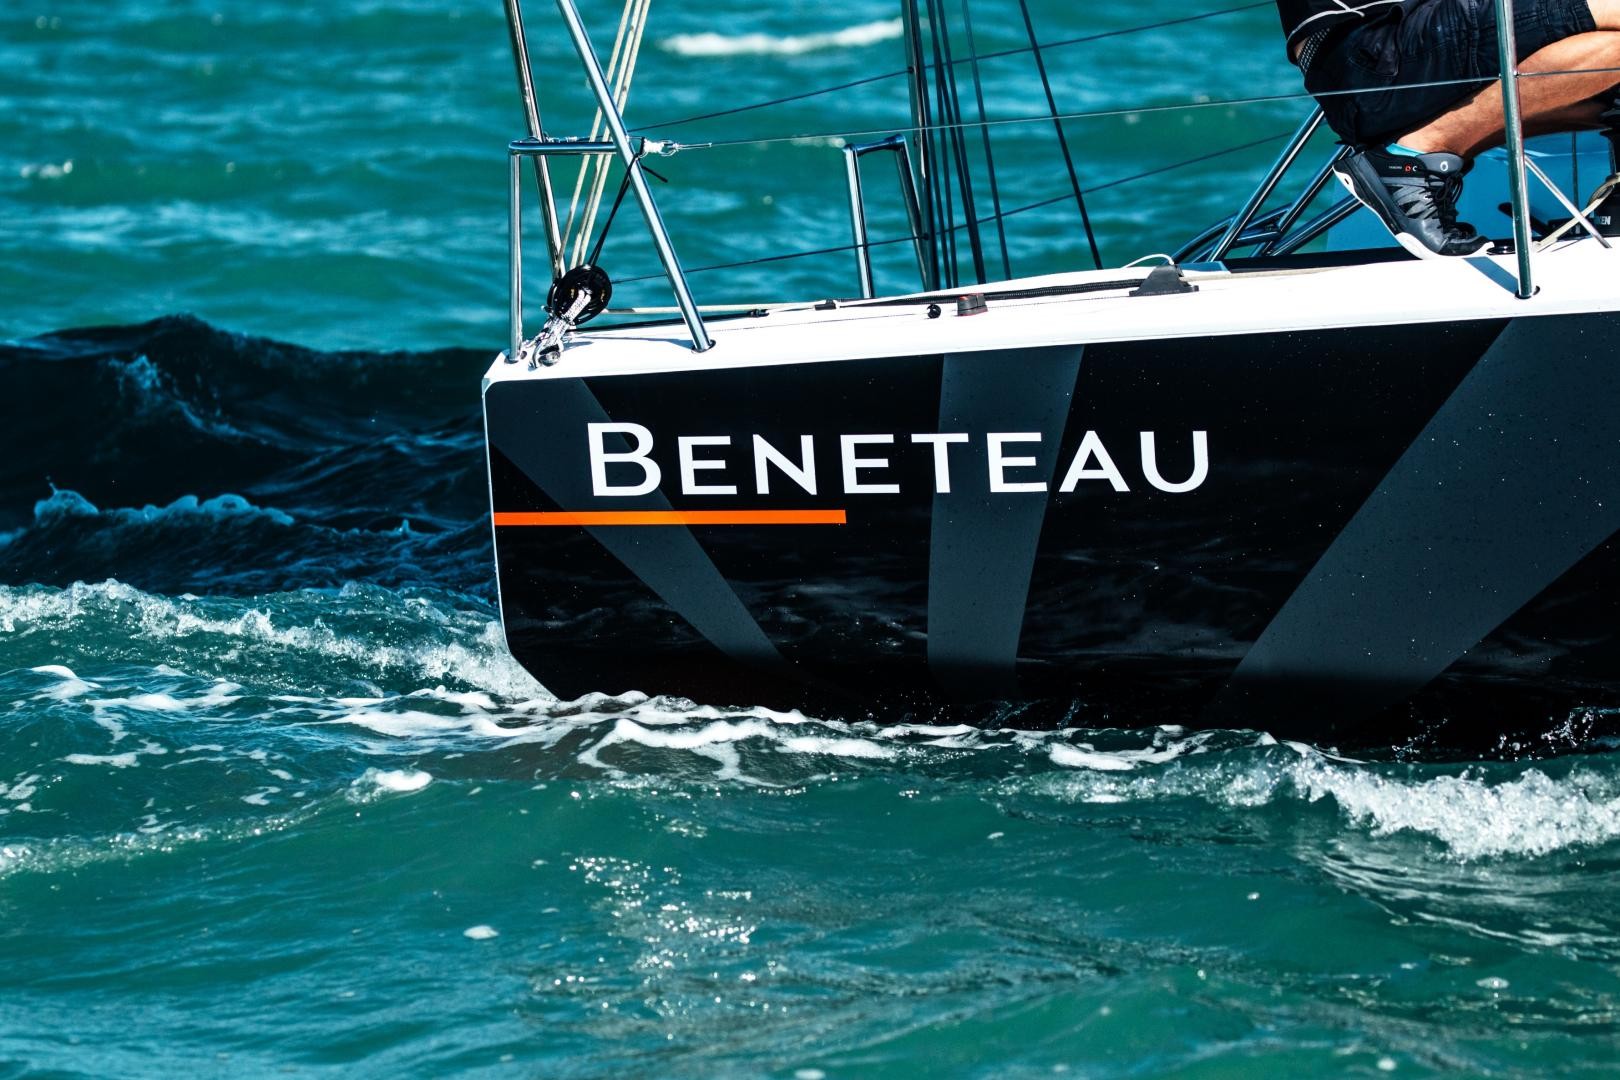 Groupe Beneteau detected a cyberattack affecting some of its servers